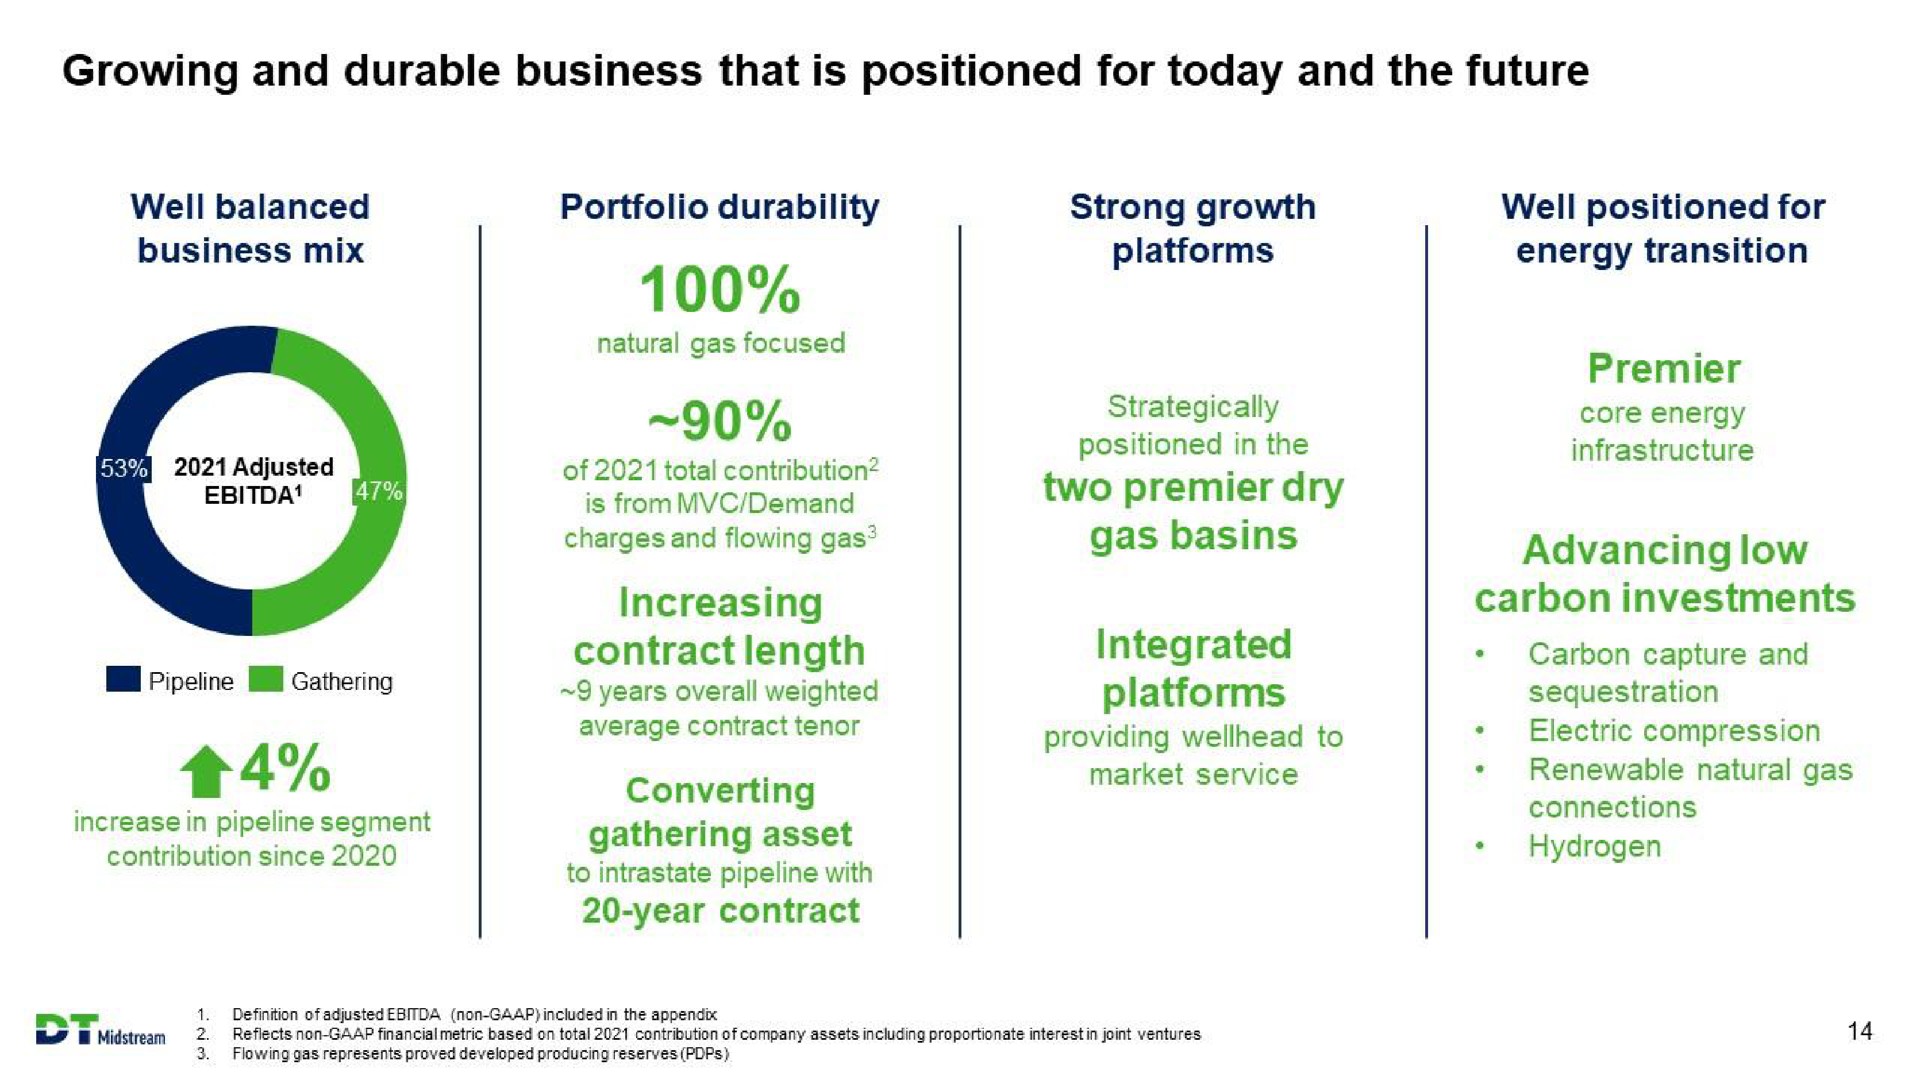 growing and durable business that is positioned for today and the future ran increasing contract length two premier dry gas basins integrated advancing low | DT Midstream